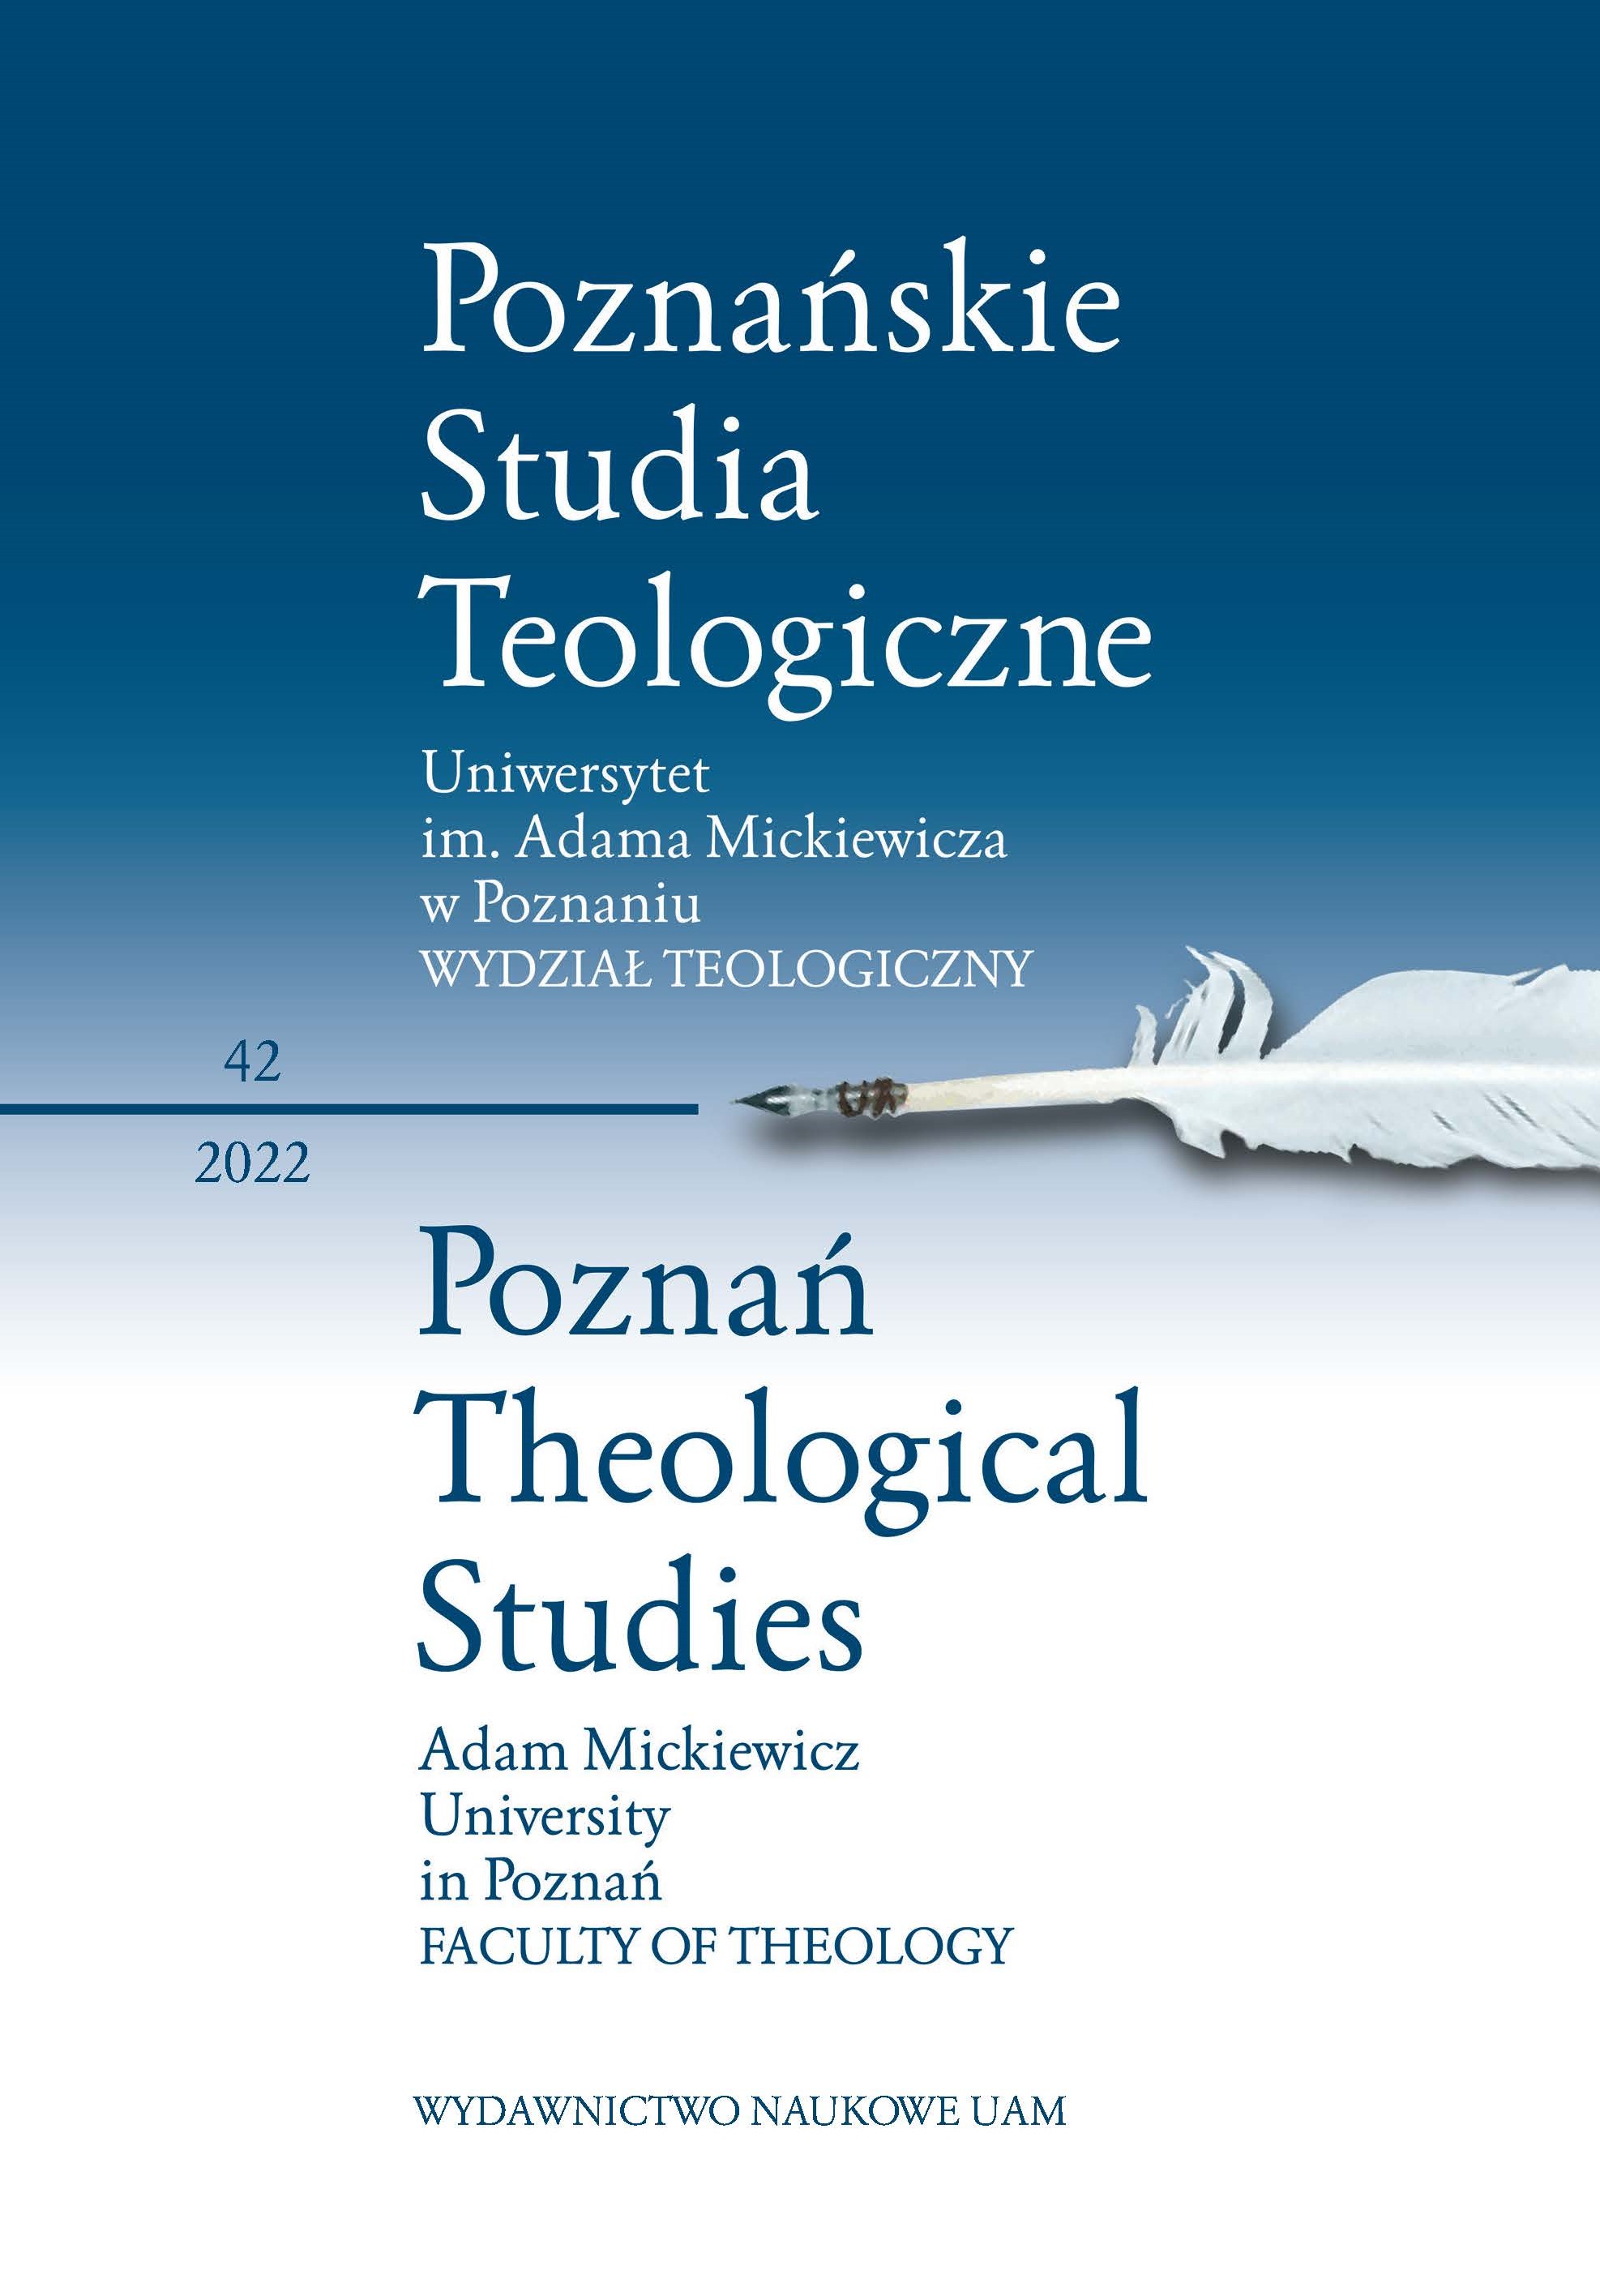 New media after the pandemic in the light of Francis’ teaching Cover Image